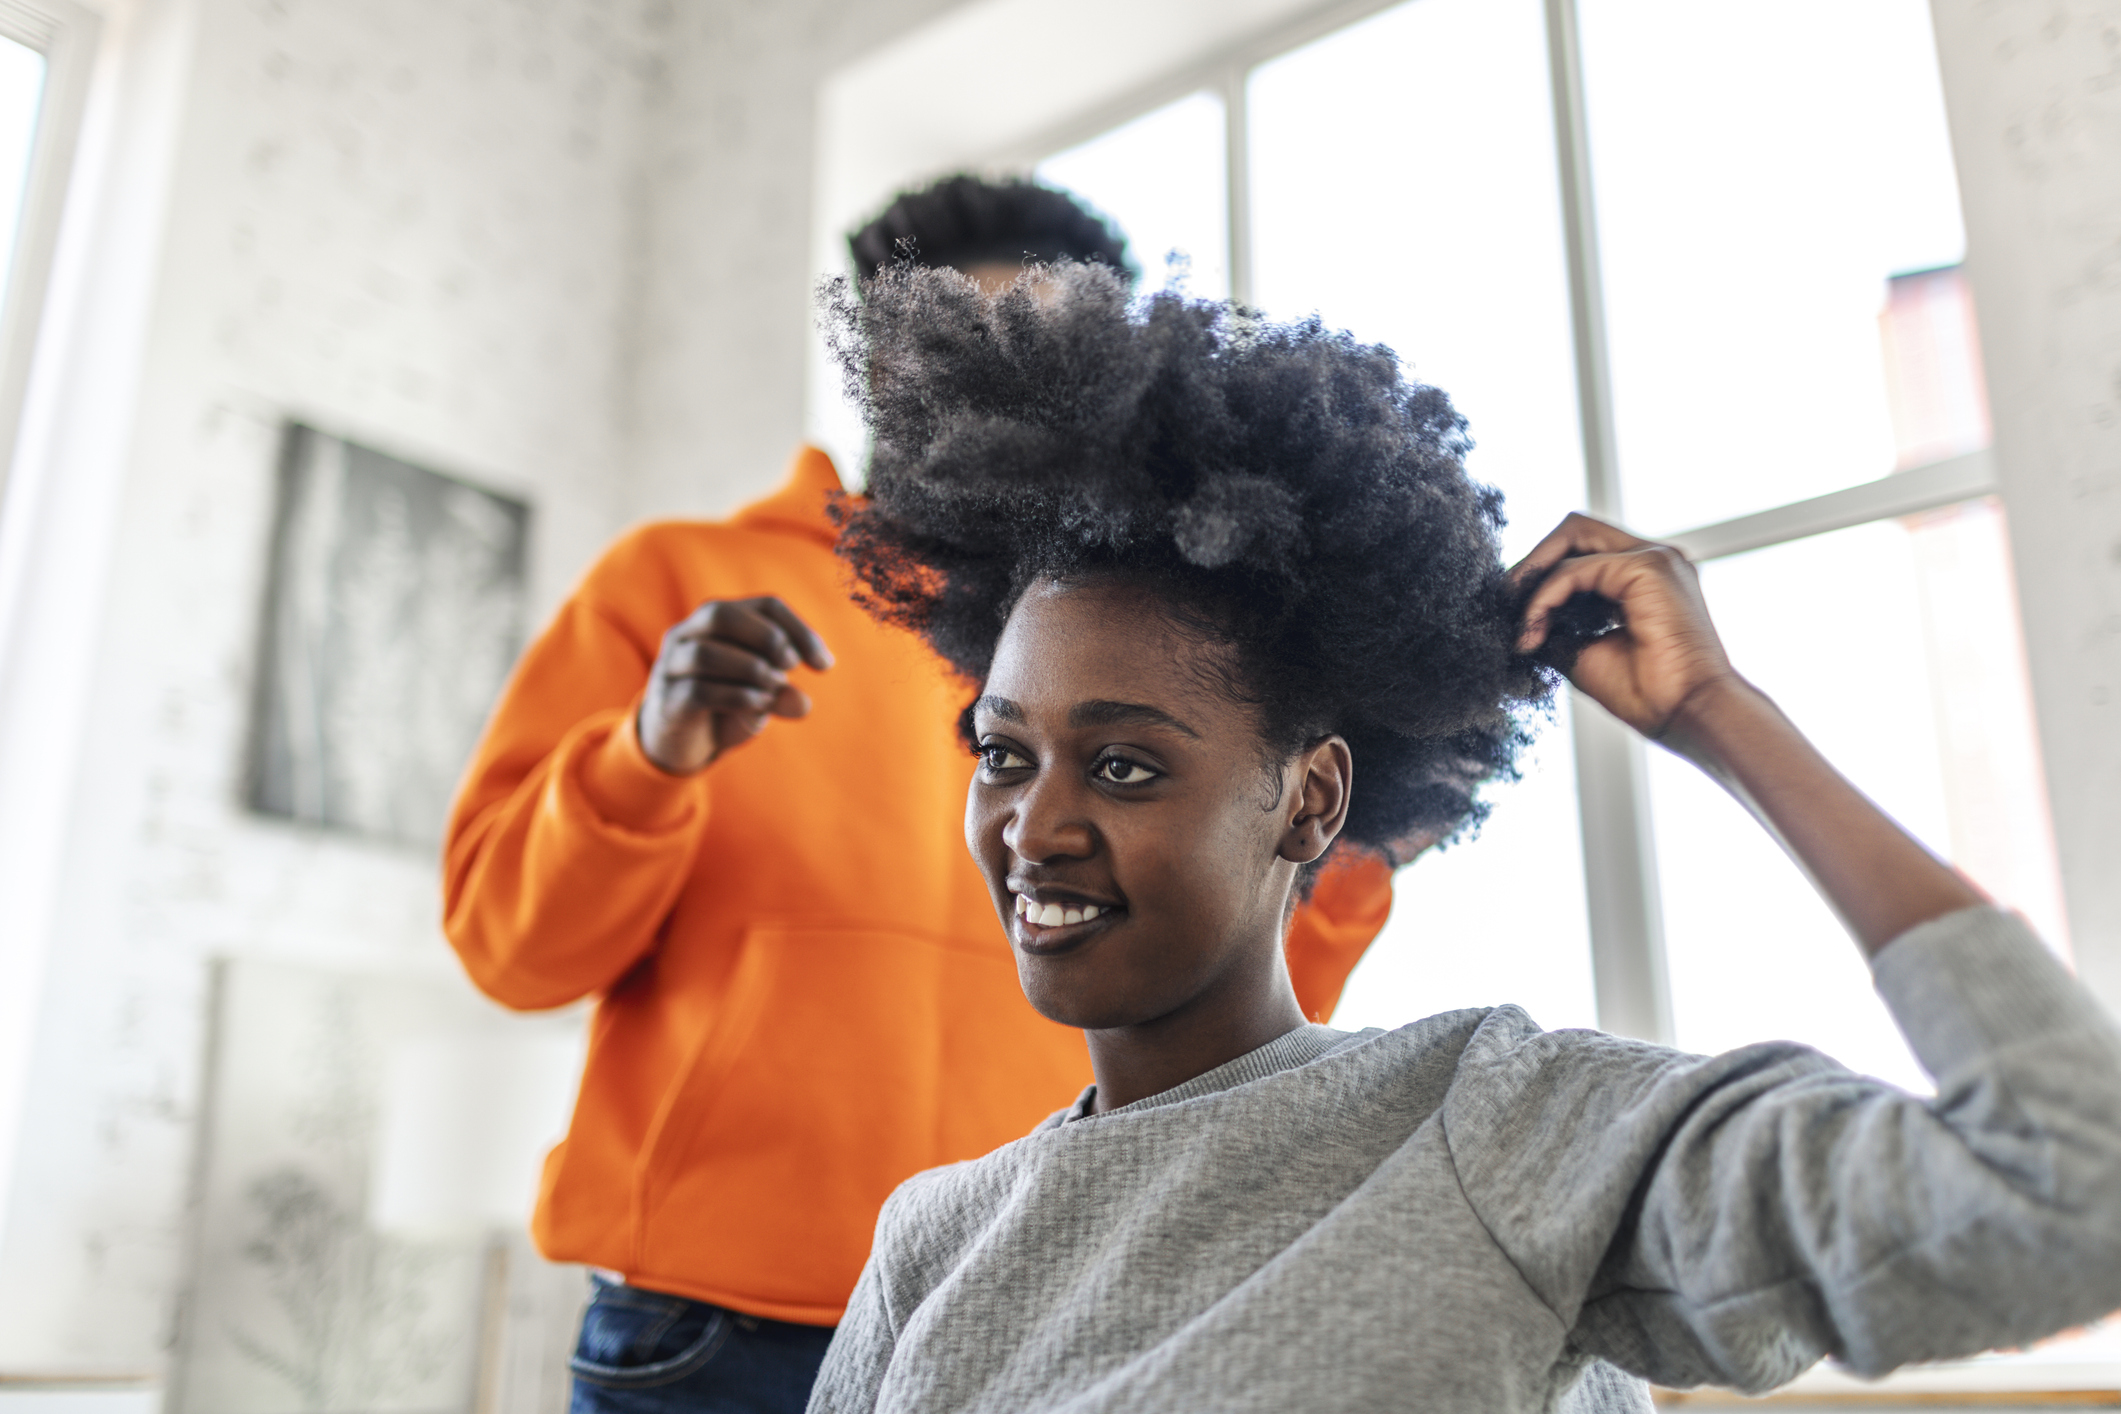 Pressed Roots, A Blowout Bar For Textured Hair, Earns Backing From Naomi Osaka As It Could Be Gearing Up To Rival Chains Like Drybar